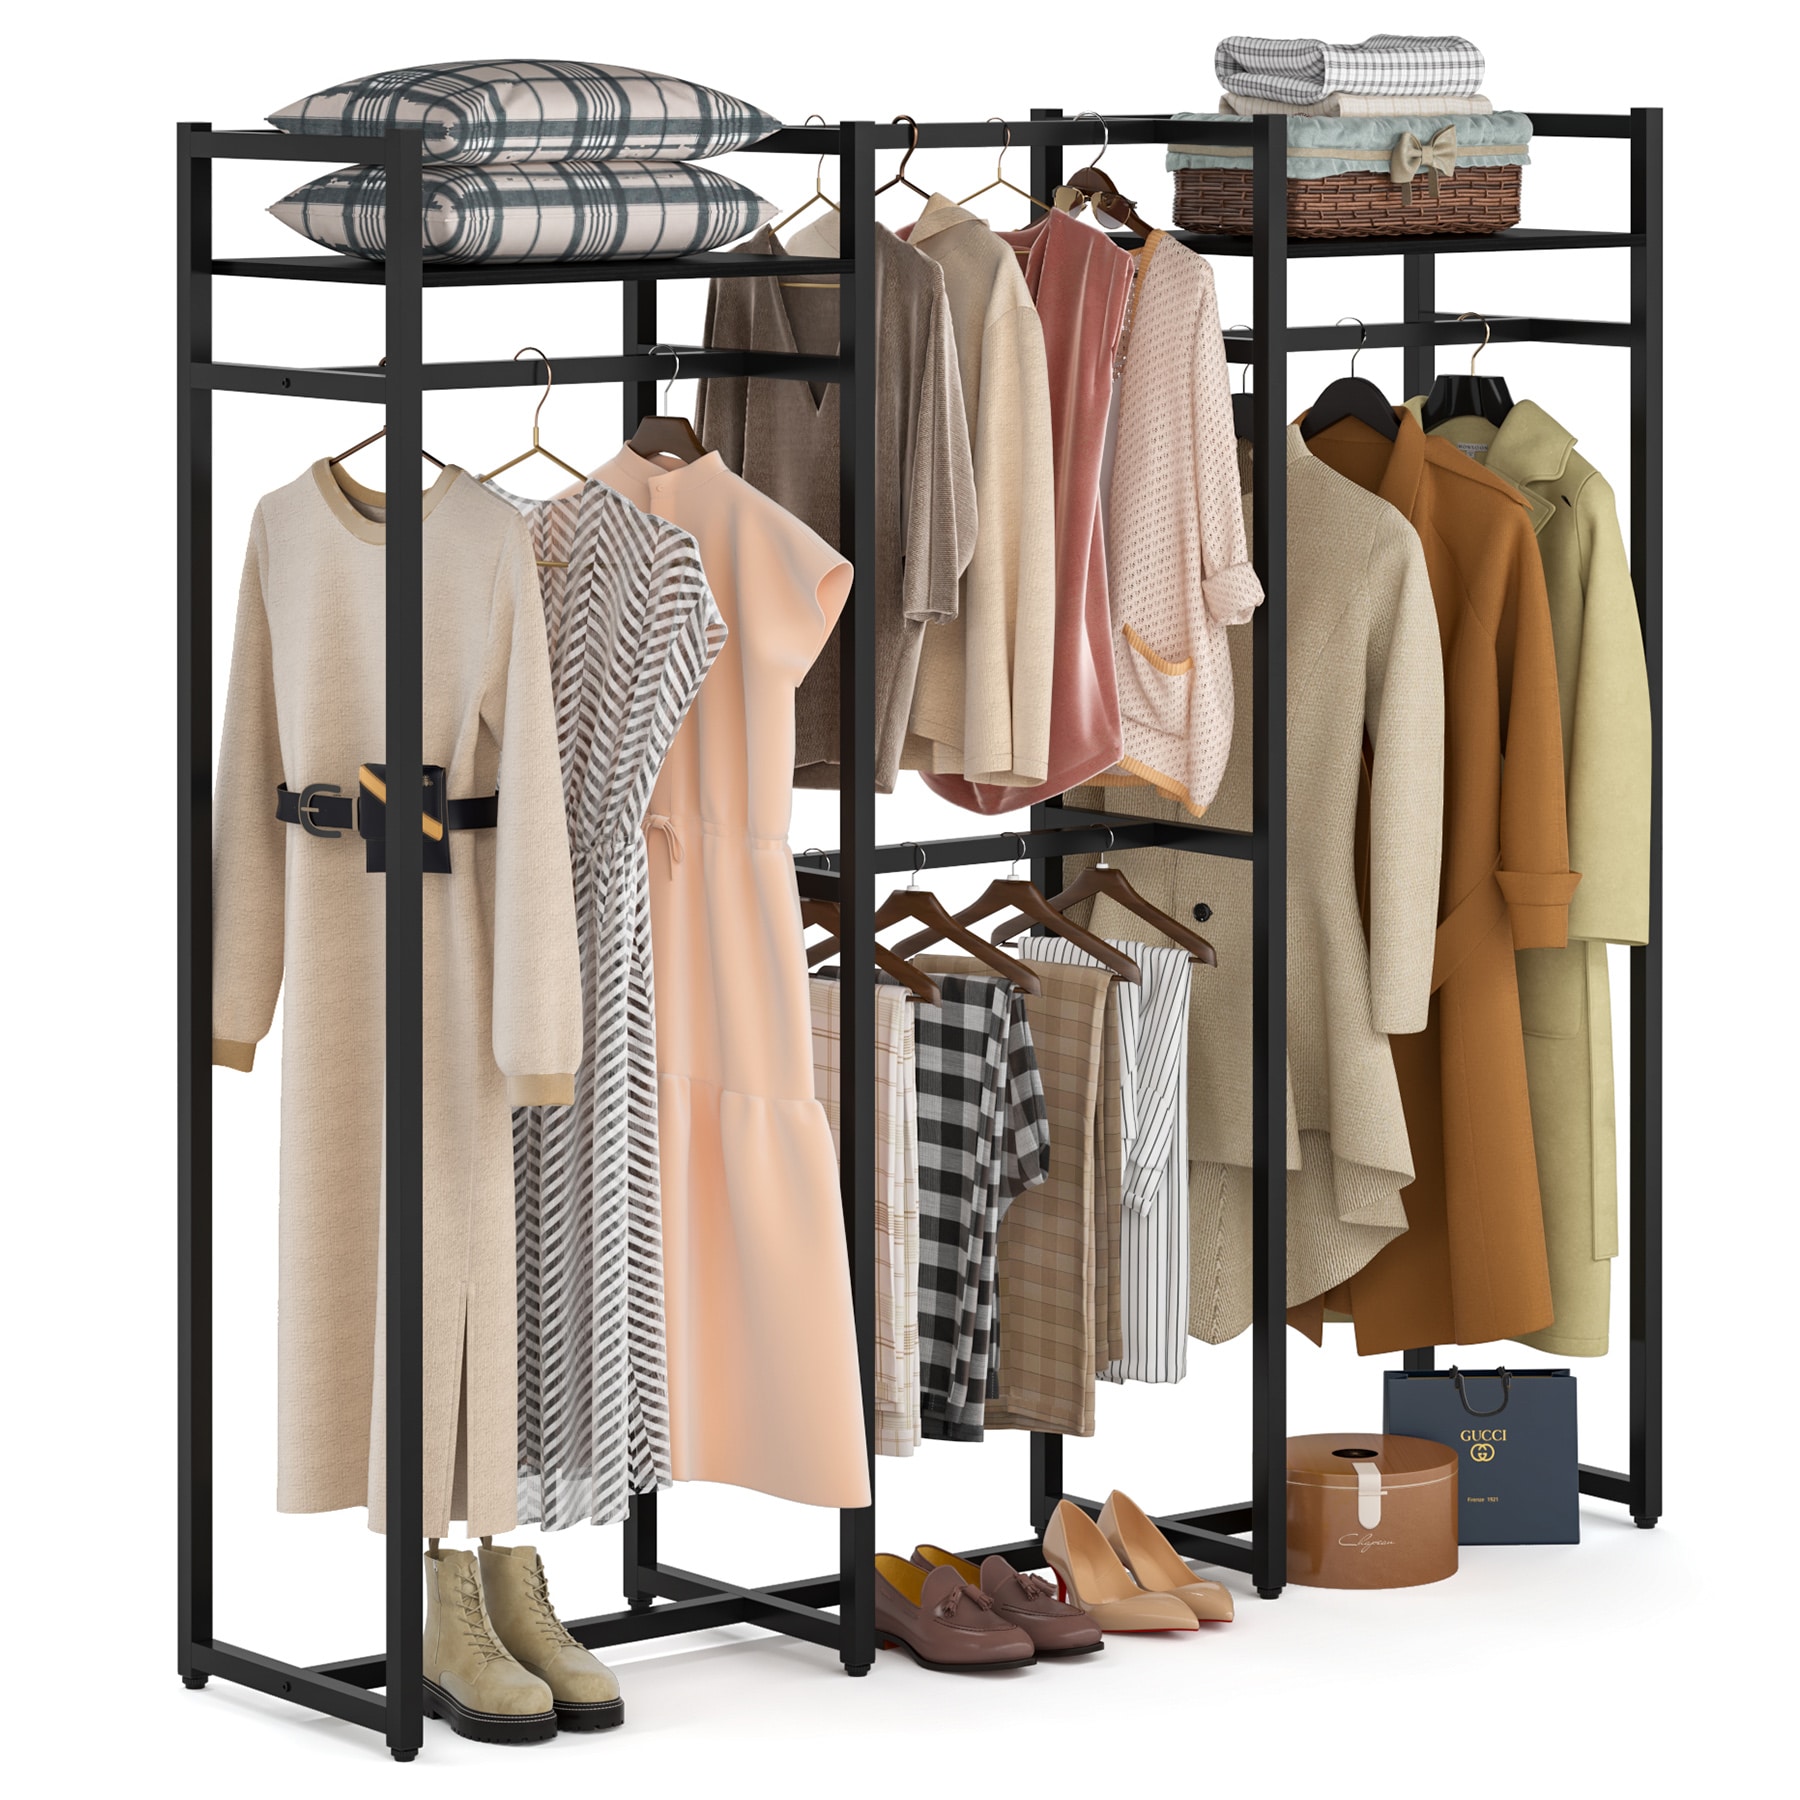 39 DIY Retail Display Ideas (from Clothing Racks to Signage)